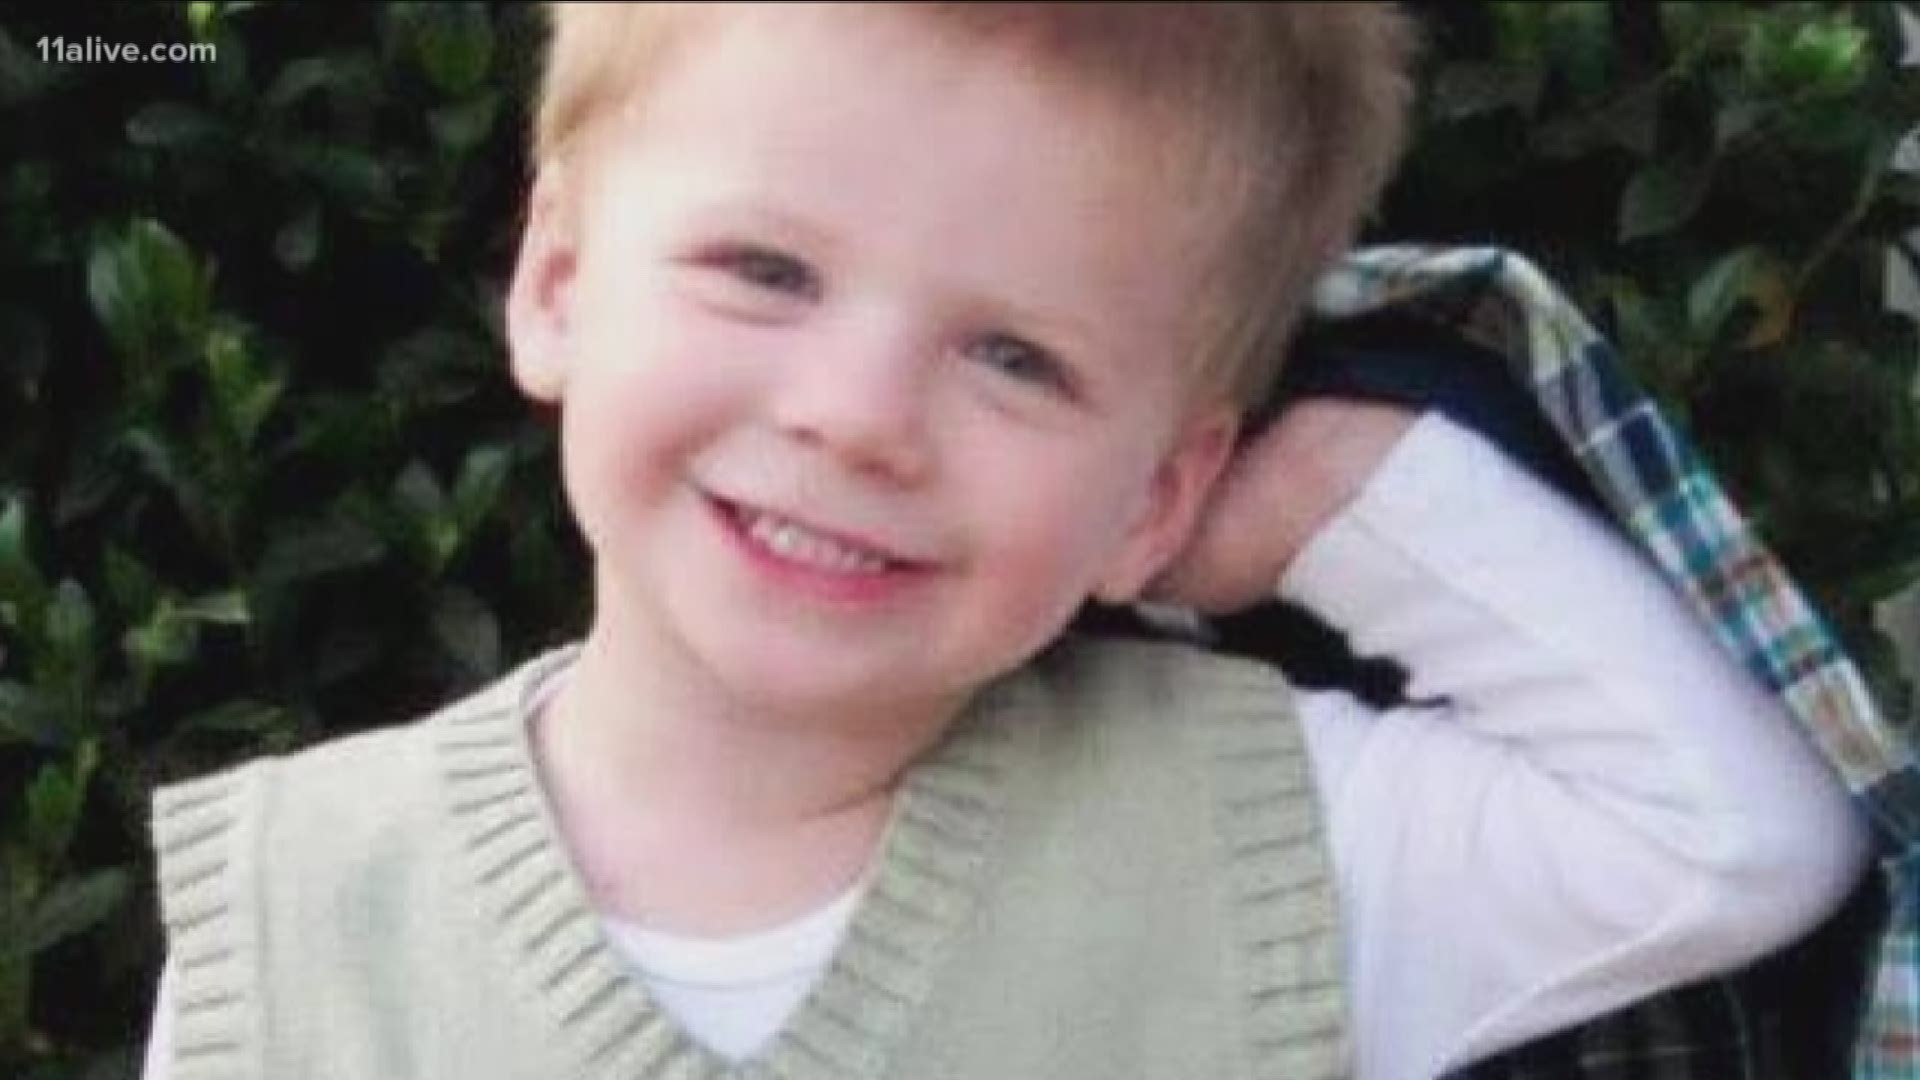 The young boy was struck by a tree limb when he was two-years-old and suffered a terrible brain injury. He died five years later, but not before changing the hearts of million. Here's 11Alive's latest "Whatever Happened To."